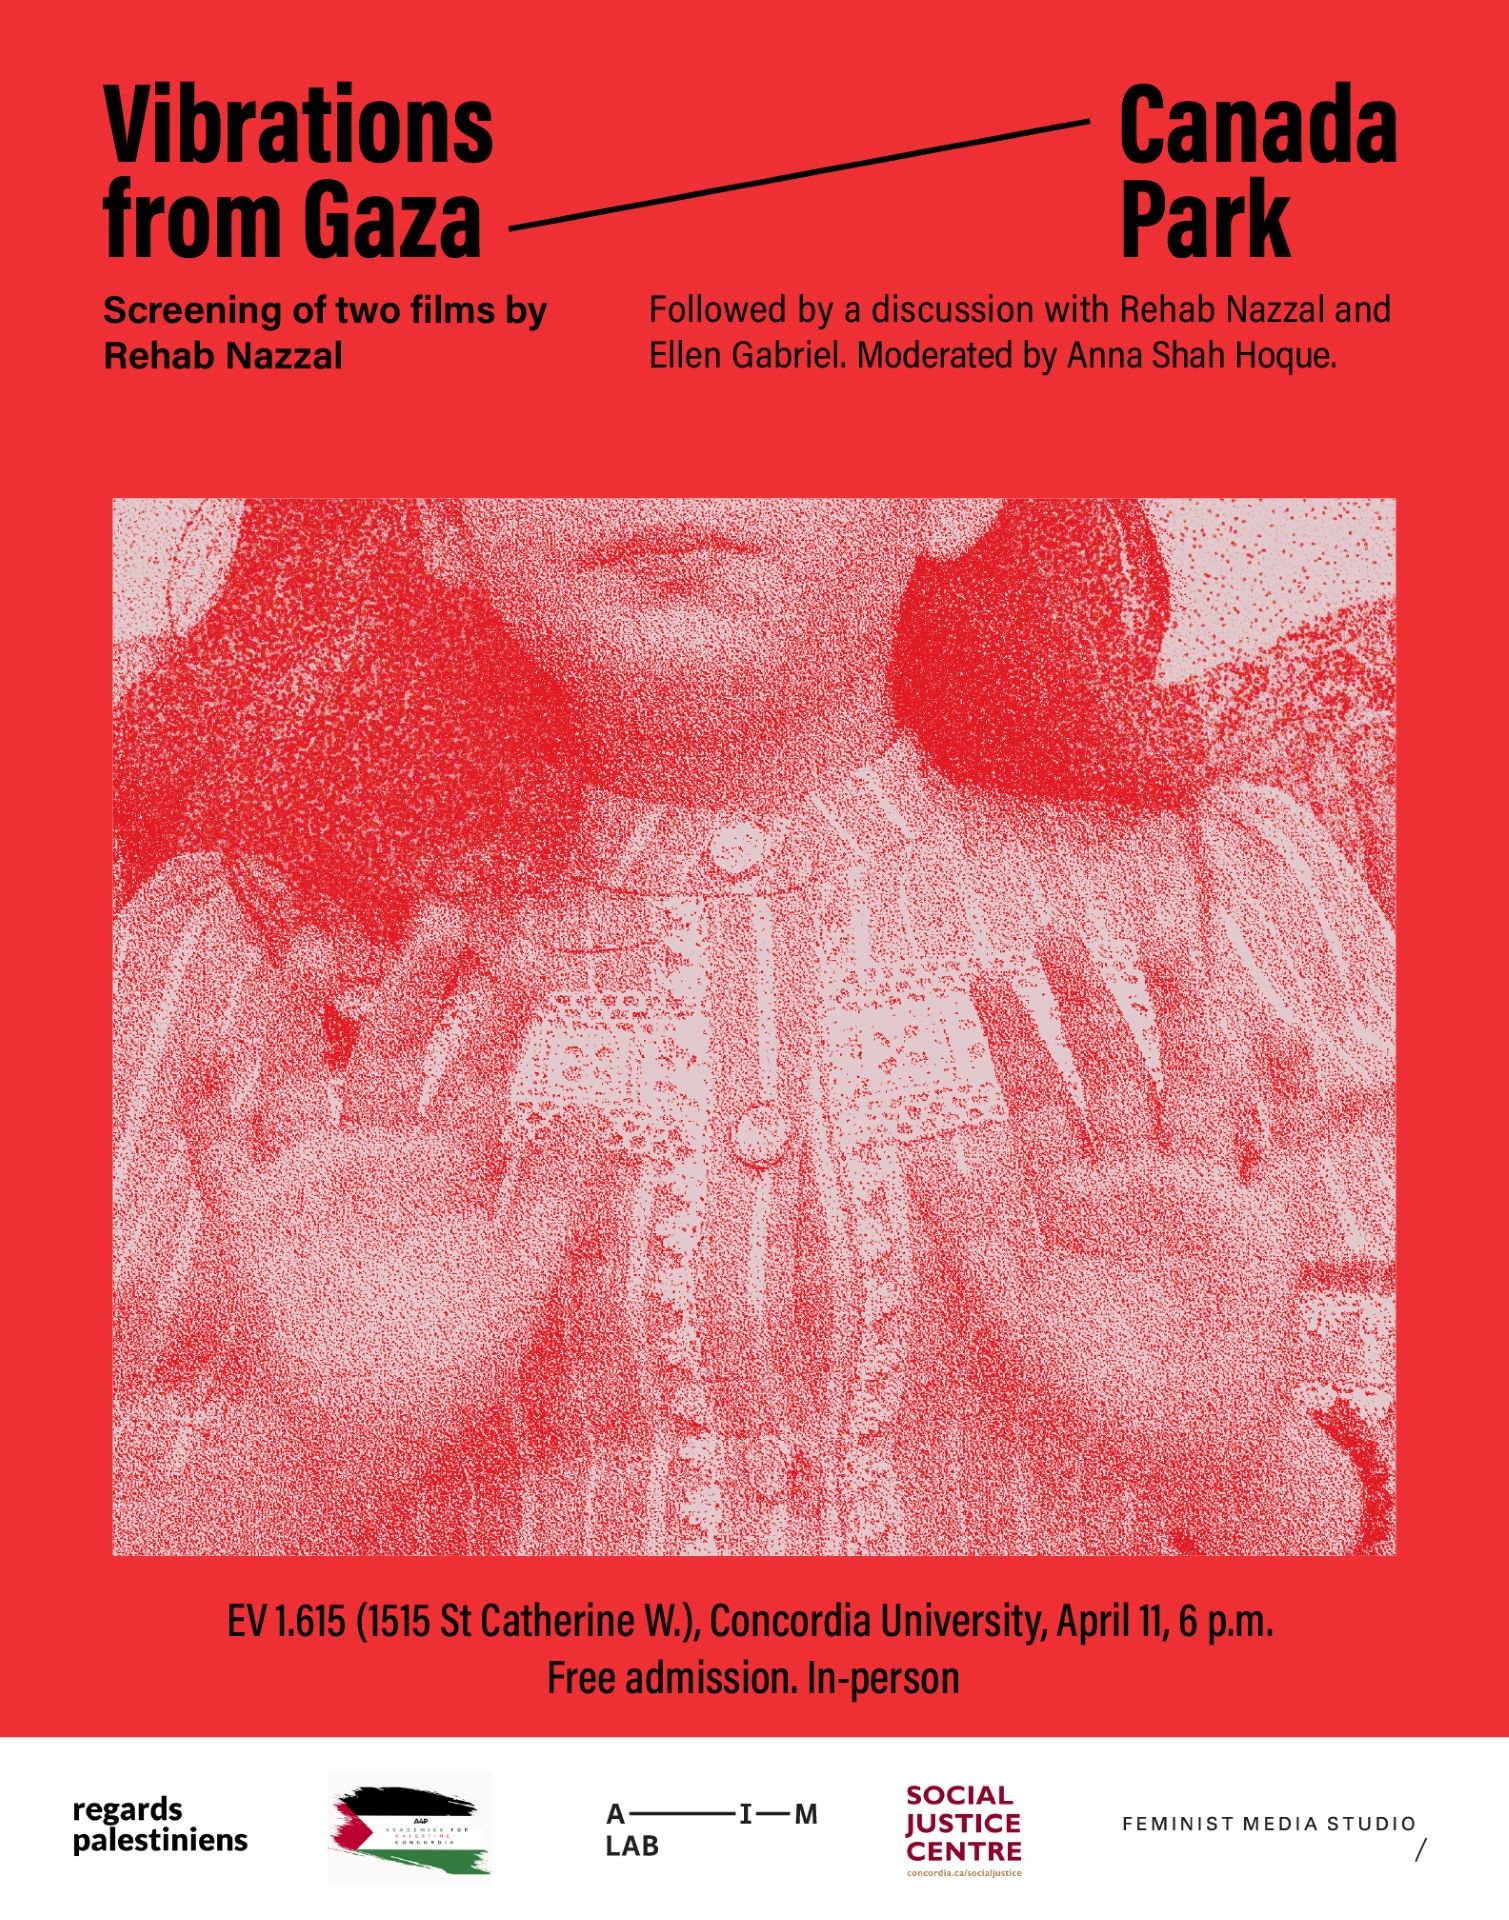 A poster in red, with a red-saturated photo of a young girl. In focus is her hands with both of her palms open towards the camera. The text on top reads: "Vibrations from Gaza”, and “Canada Park” with a slanted line in between. Under, it continues: “Screening of two films by Rehab Nazzal. Followed by a discussion with Rehab Nazzal and Ellen Gabriel. Moderated by: Anna Shah Hoque”. The text at the bottom reads: “EV 1.615 (1515 St Catherine W.), Concordia University, April 11, 6 p.m. Free admission. In-person”. Under are the following five logos: regards palestinians, A4P, AIM Lab, Social Justice Center, Feminist Media Studio. 